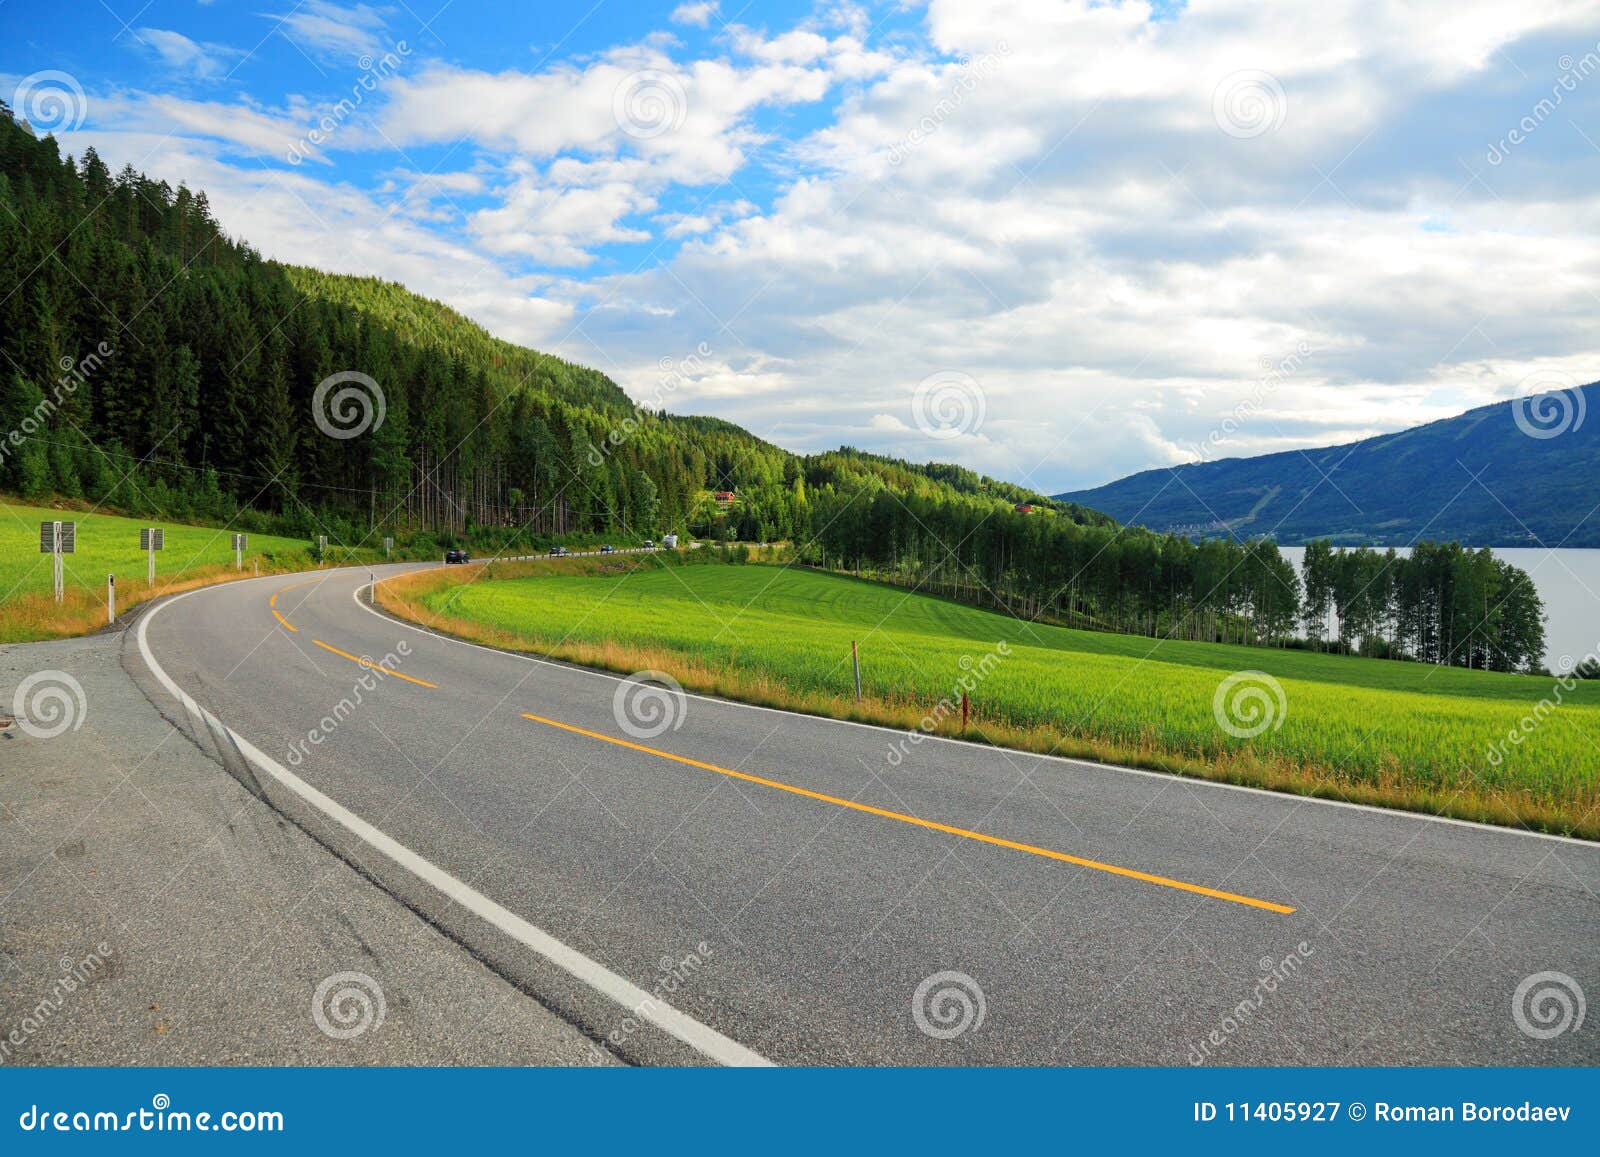 mountains road sky landscape mountain summer travel empty highway nature asphalt green forest rural way blue beautiful trip route